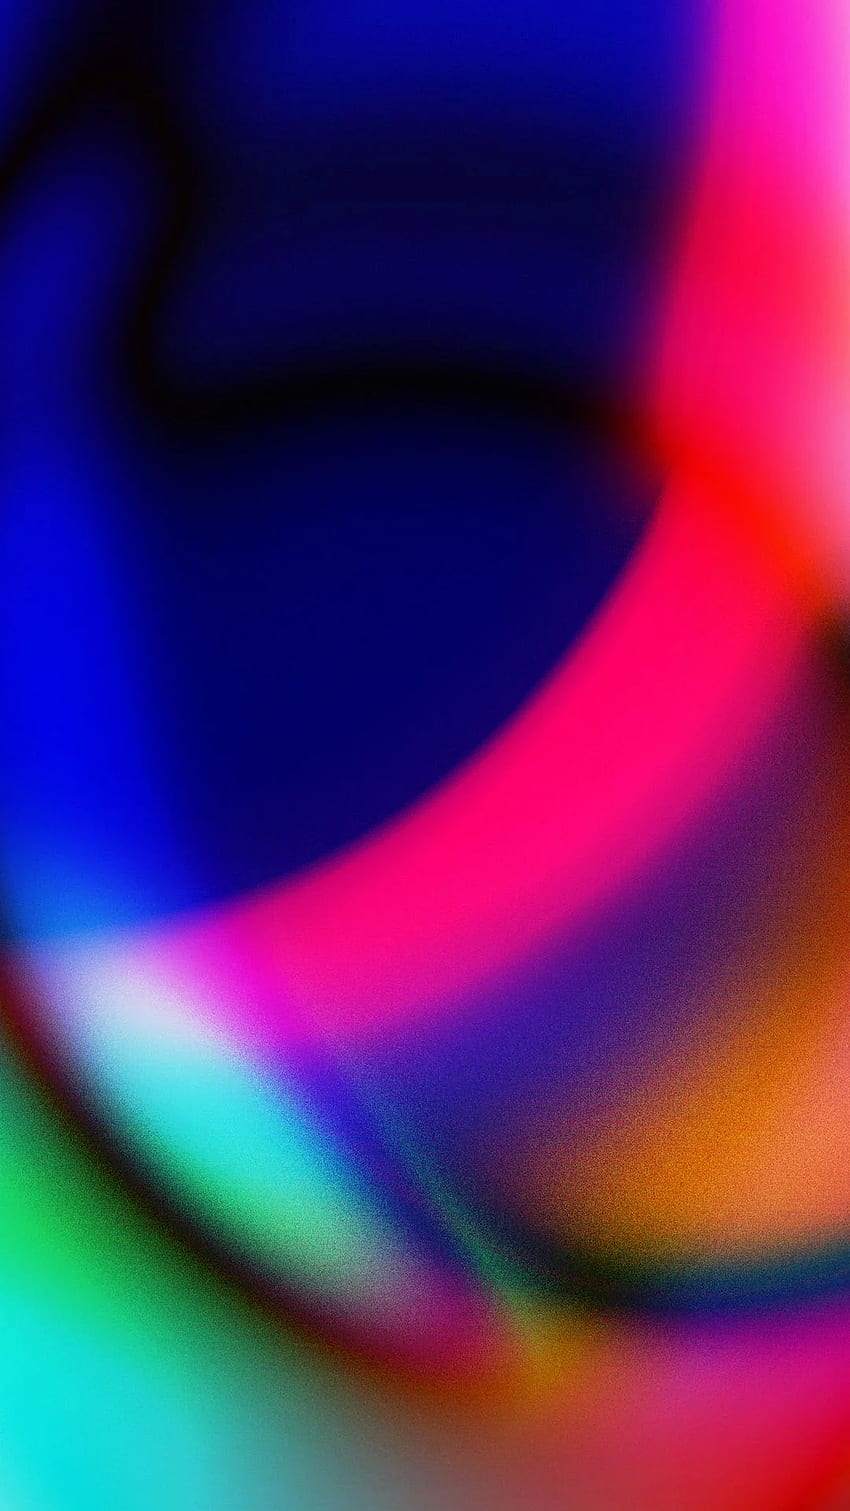 Chill Abstract Blur iPhone 7, 6s, 6 Plus, Pixel xl , One HD phone wallpaper